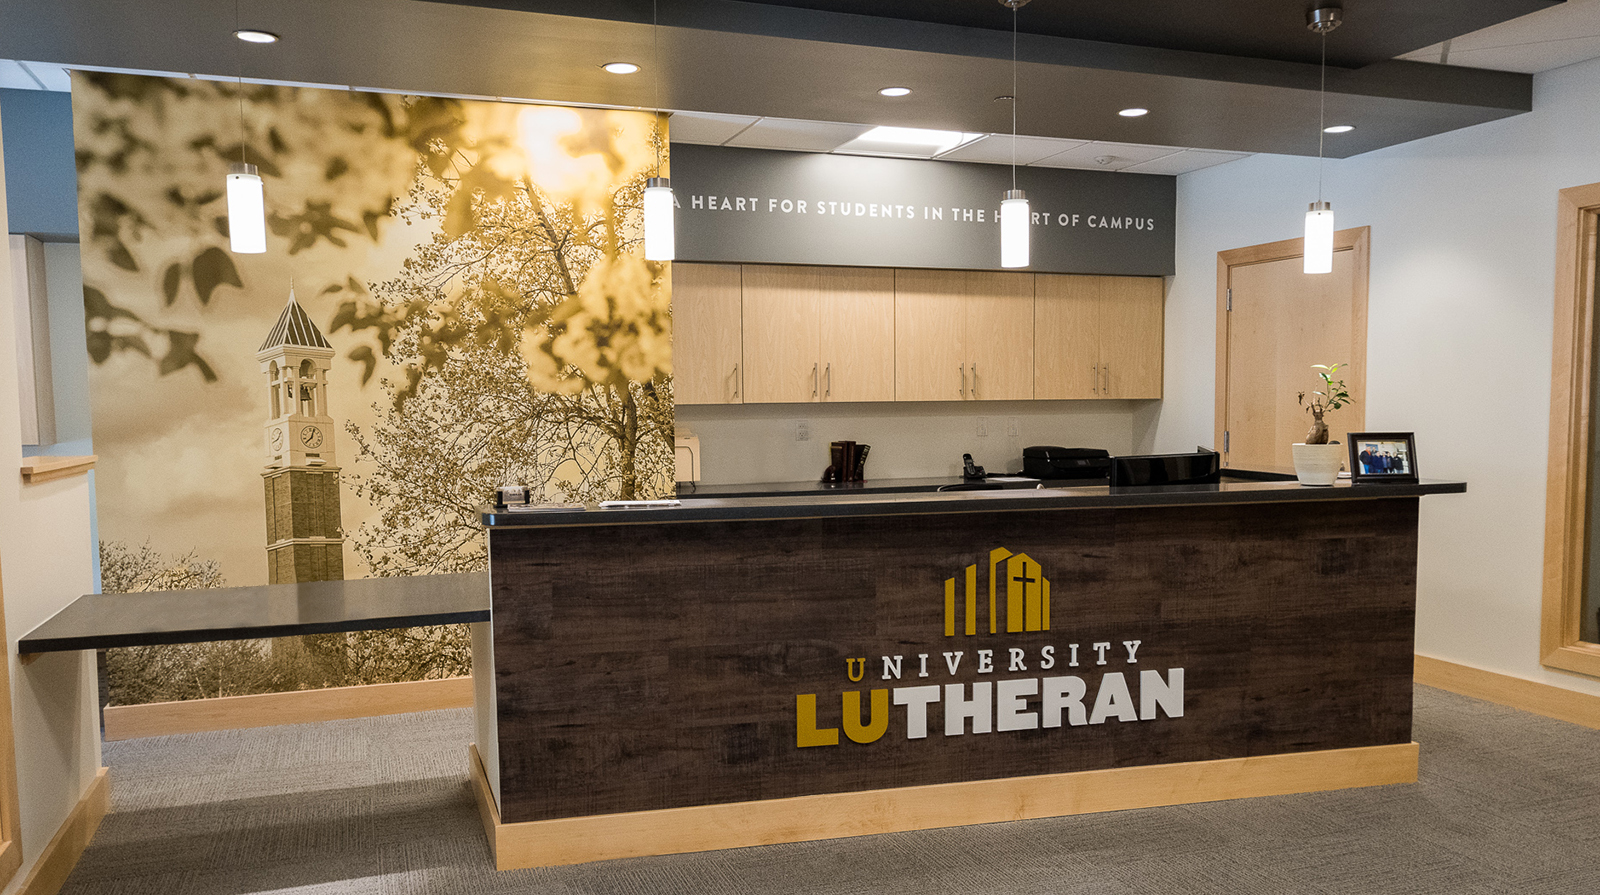 Full Environmental Design by Creativeinc. for University Lutheran Church in West Lafayette, IN. Custom Signage, Interior Signage, Exterior Signage, Wayfinding Signage, ADA Compliant Signage, Wall Wrap, Wall Graphics, Cut Vinyl Graphics, Elevator Graphics, 3D Signage, Frosted Vinyl, Design Services, Installation.